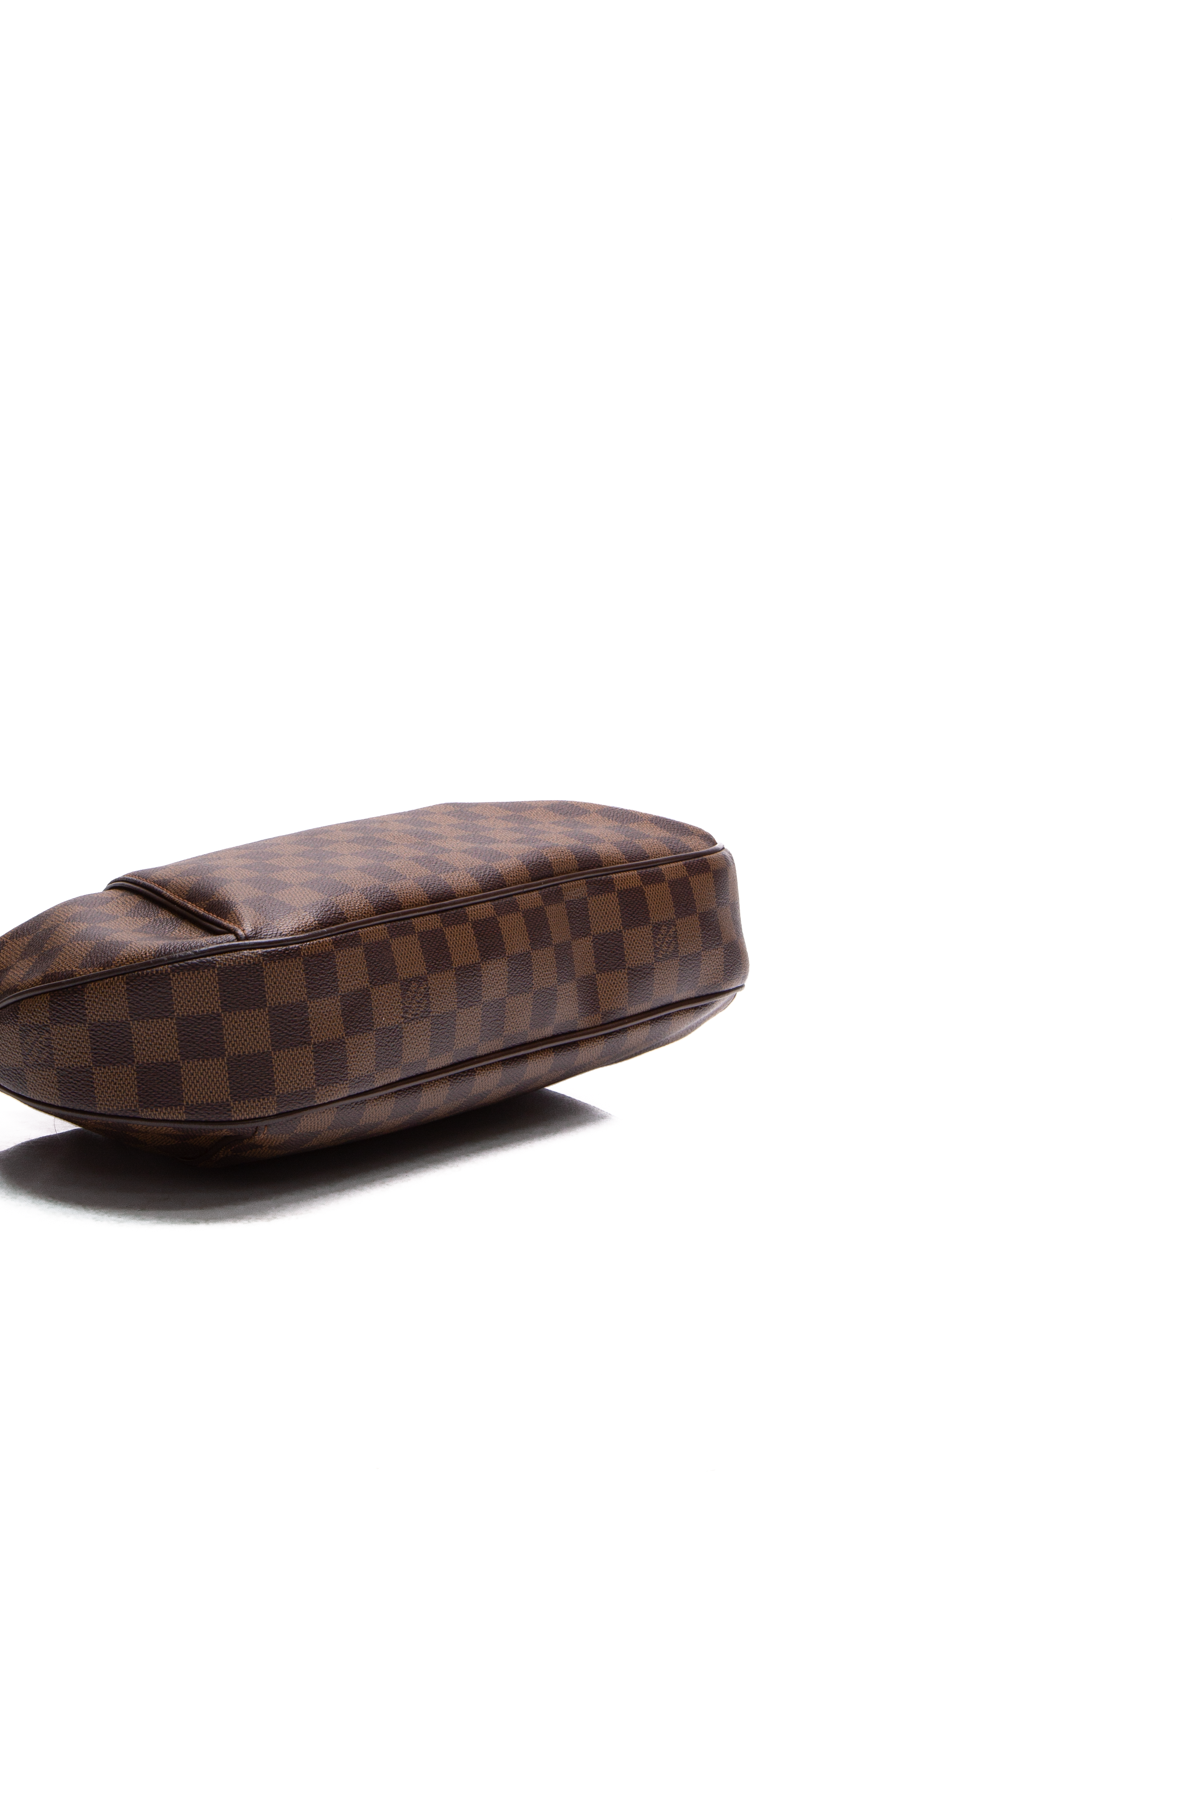 How to Tell If a Louis Vuitton Pallas MM Is Real or Fake (Comparison) –  Bagaholic